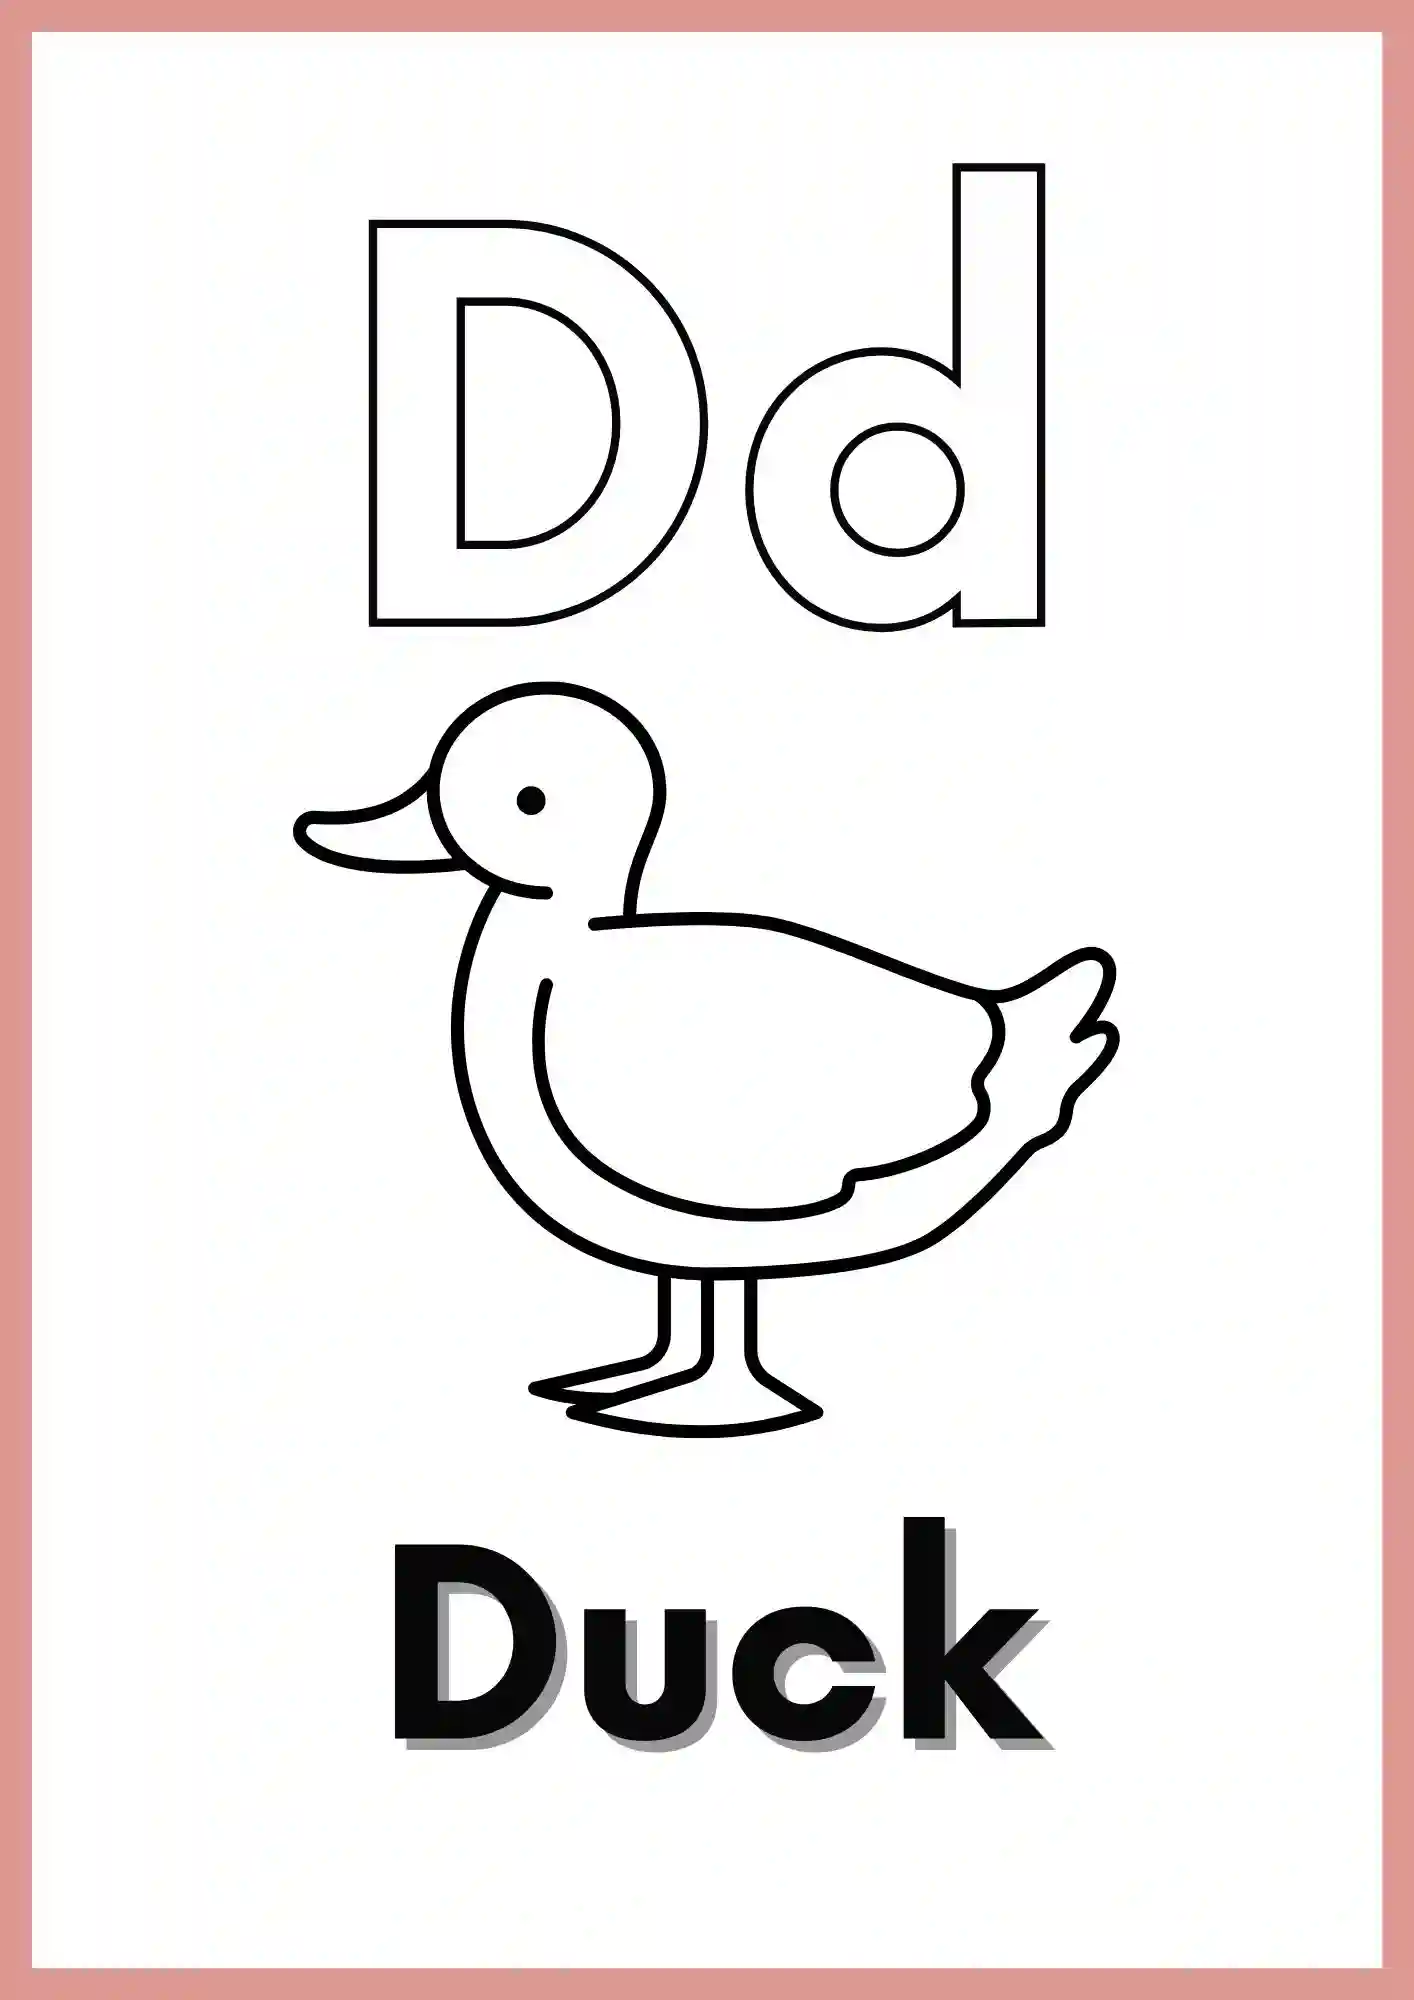 Letter D with DUCK colouring worksheet